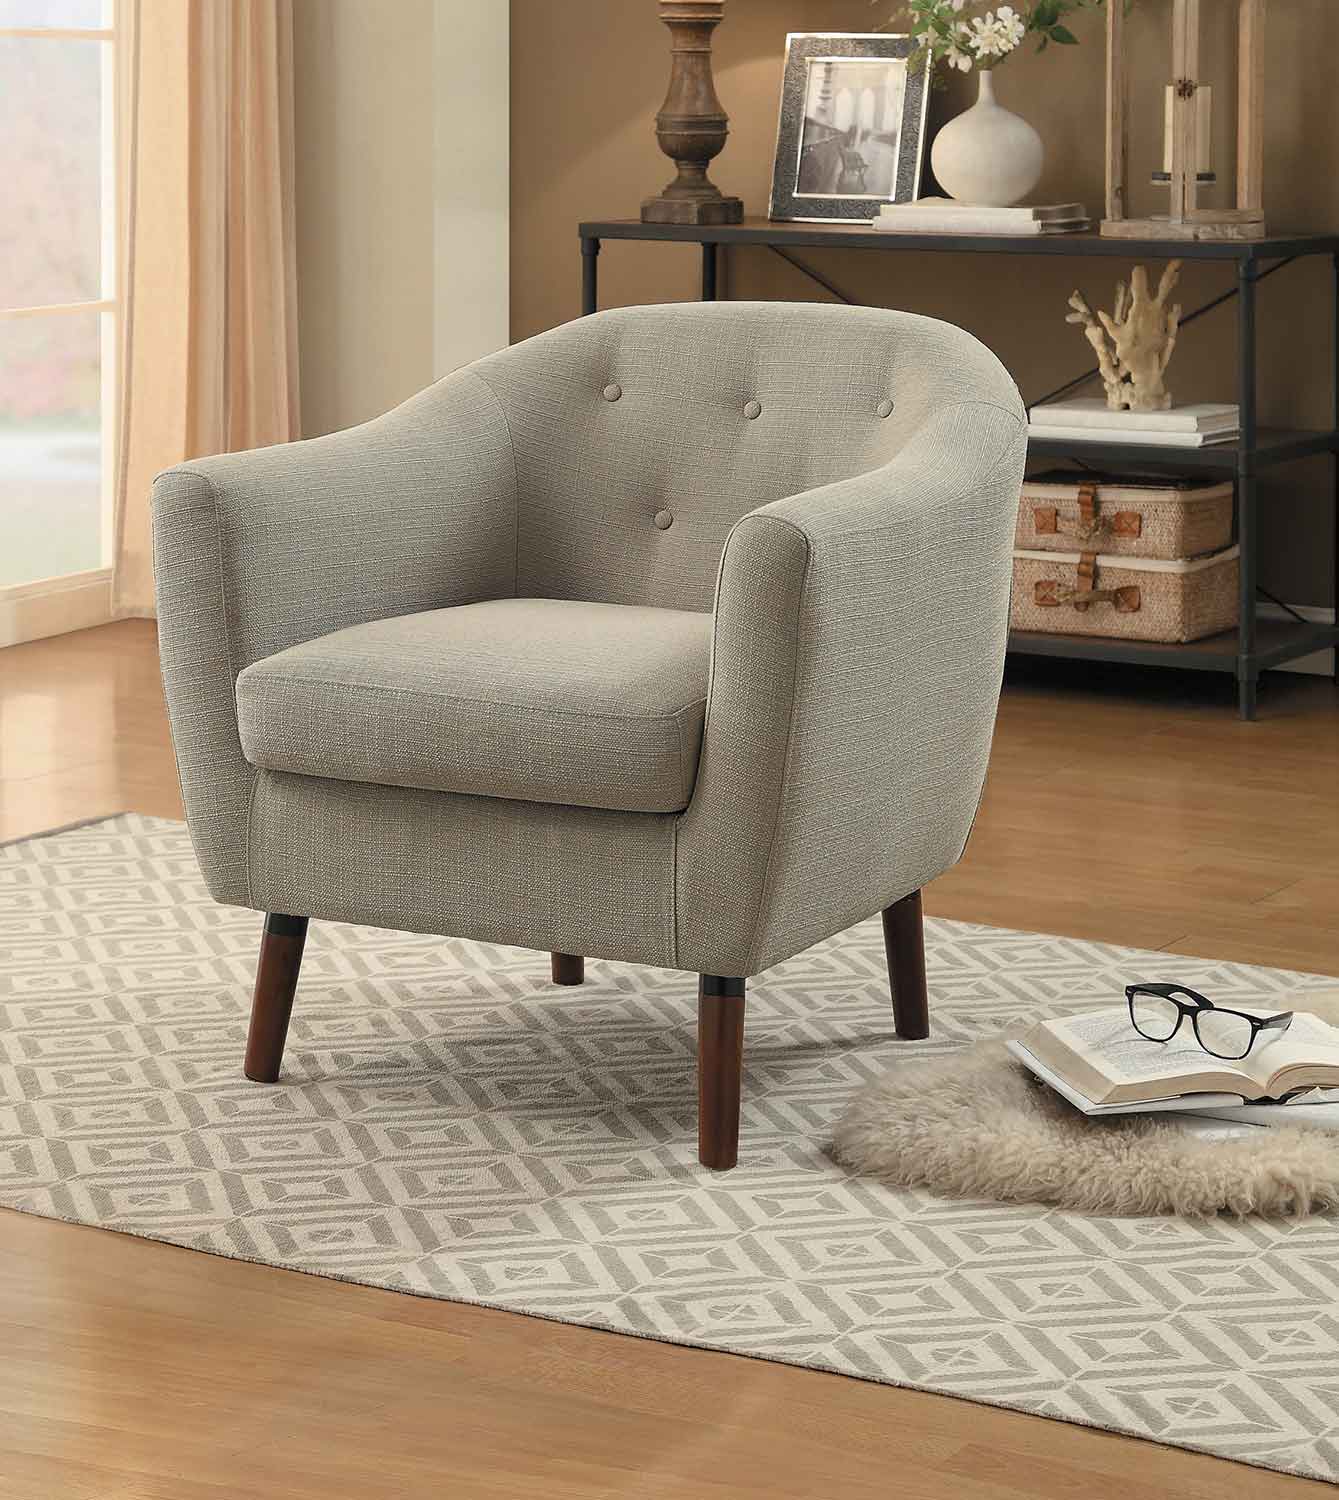 Homelegance Lucille Accent Chair - Beige